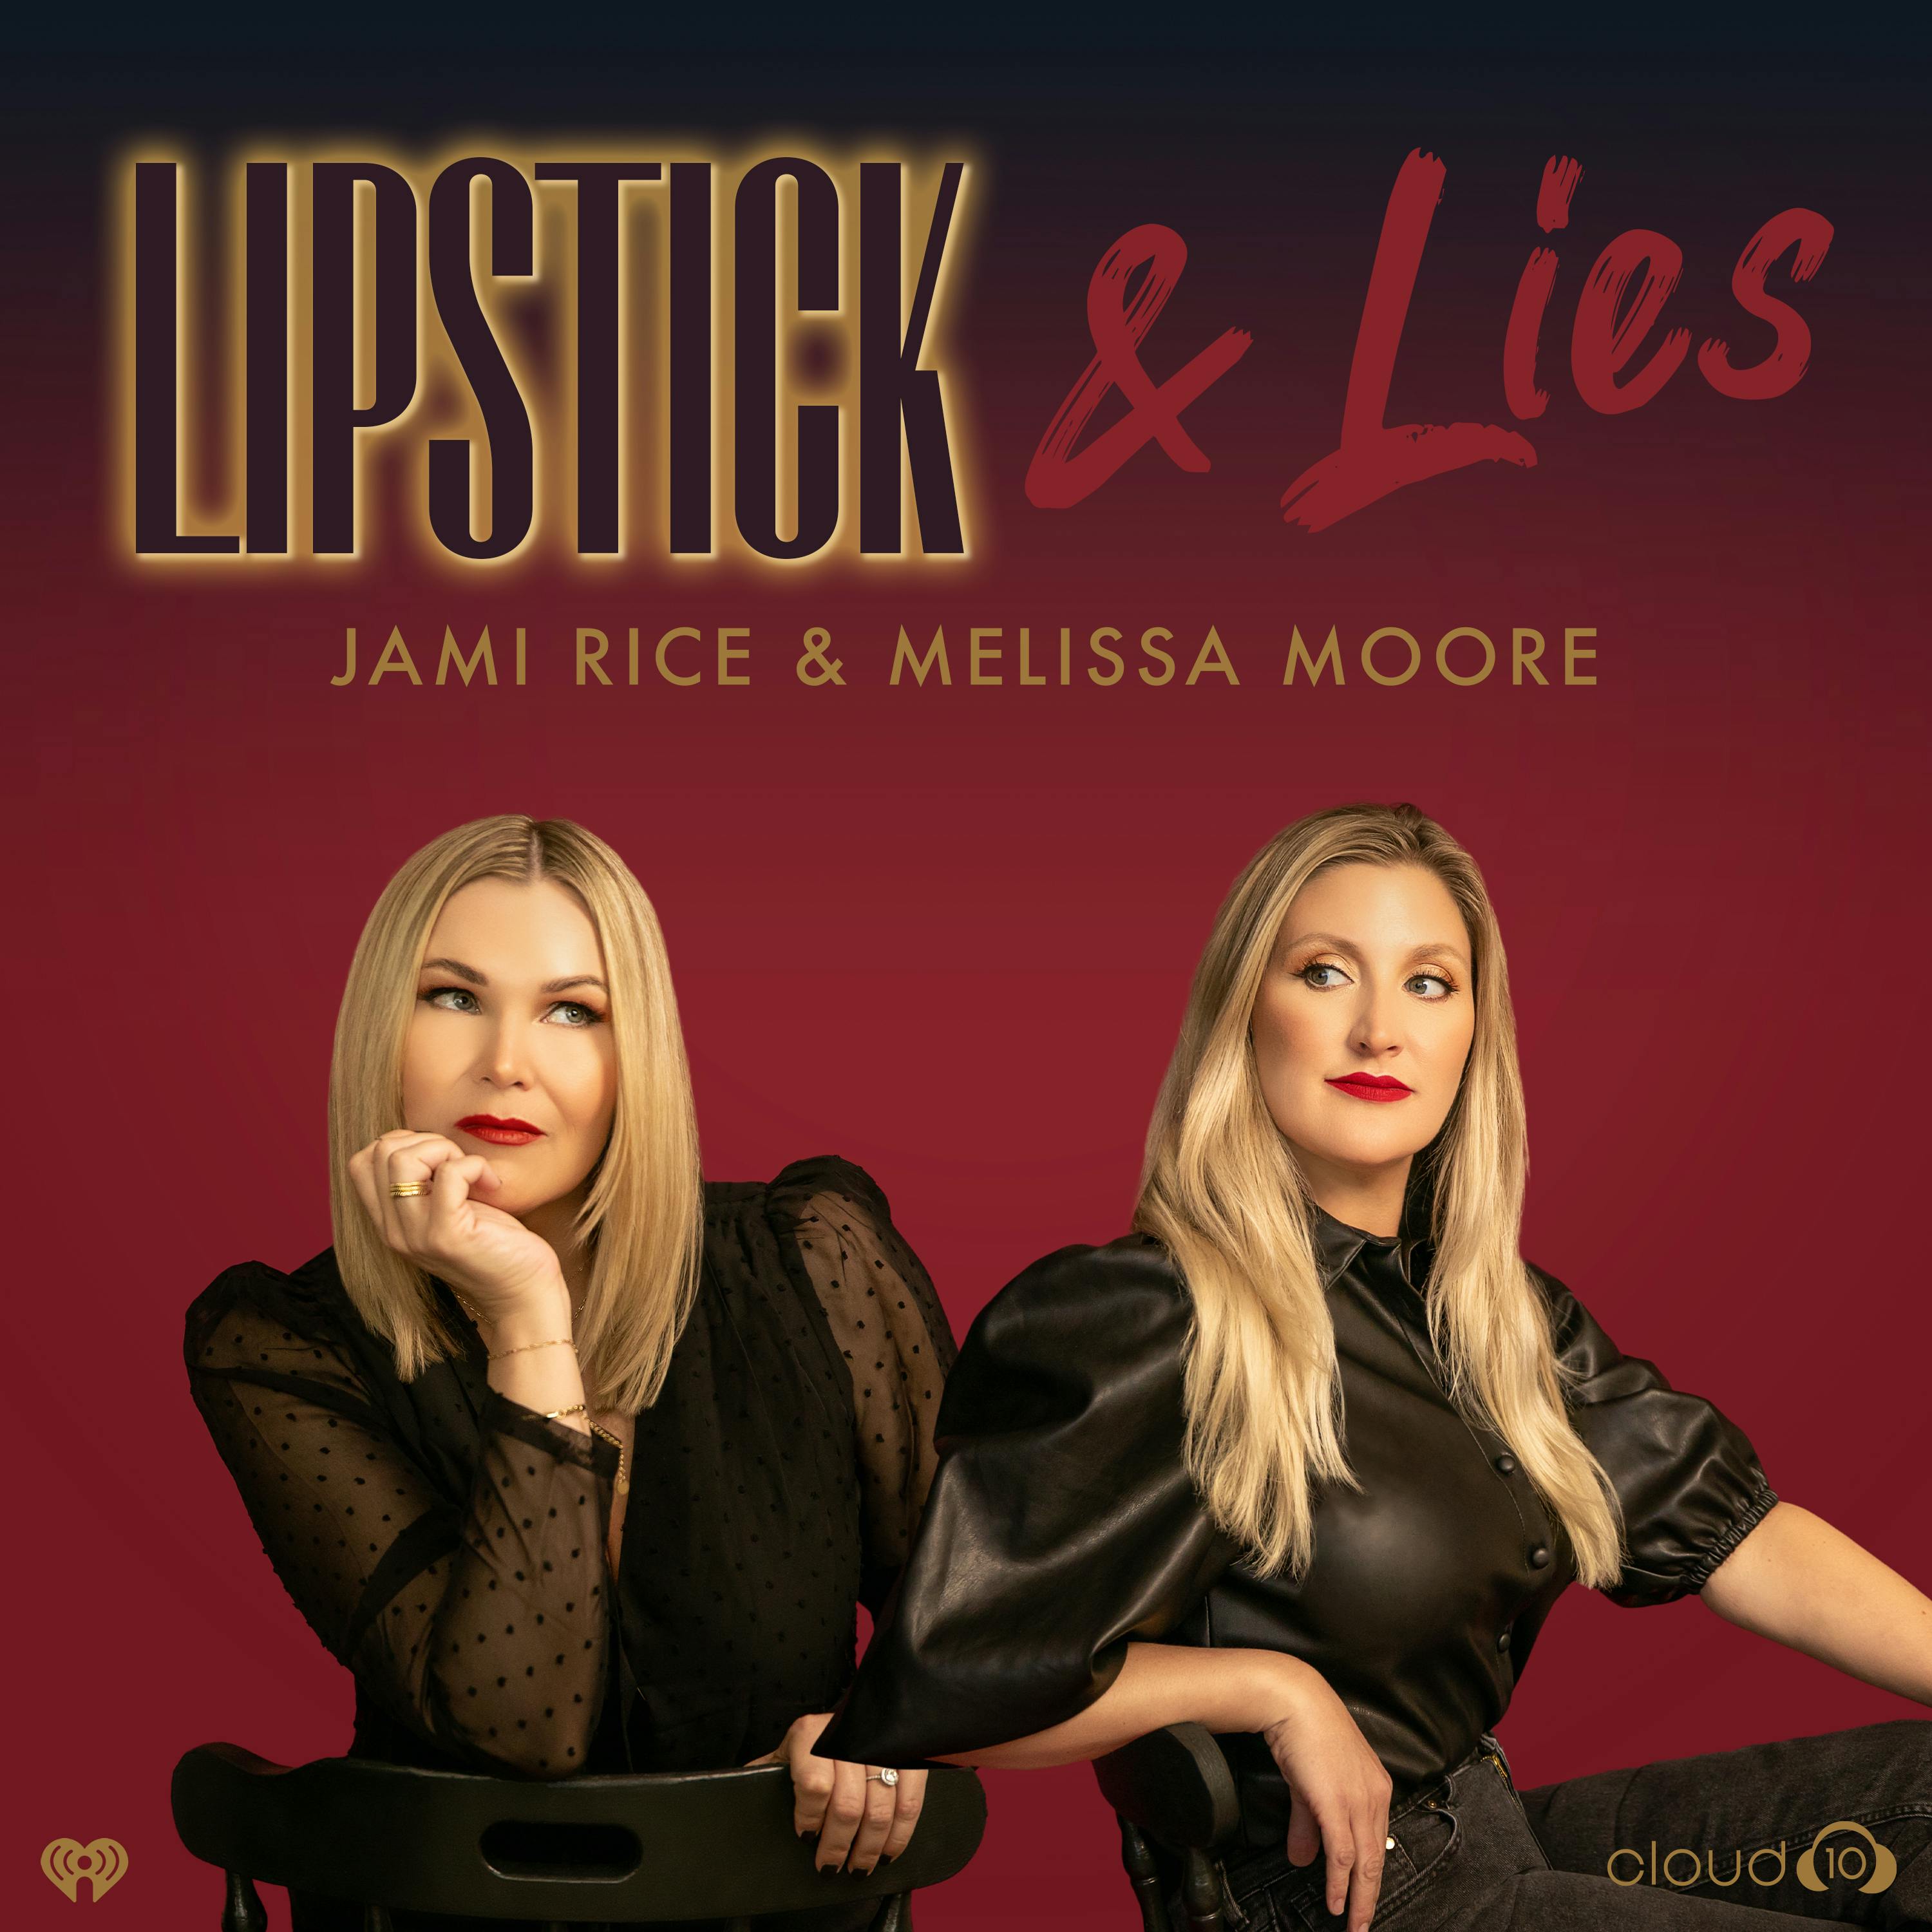 Introducing: Lipstick & Lies with Jami Rice and Melissa Moore